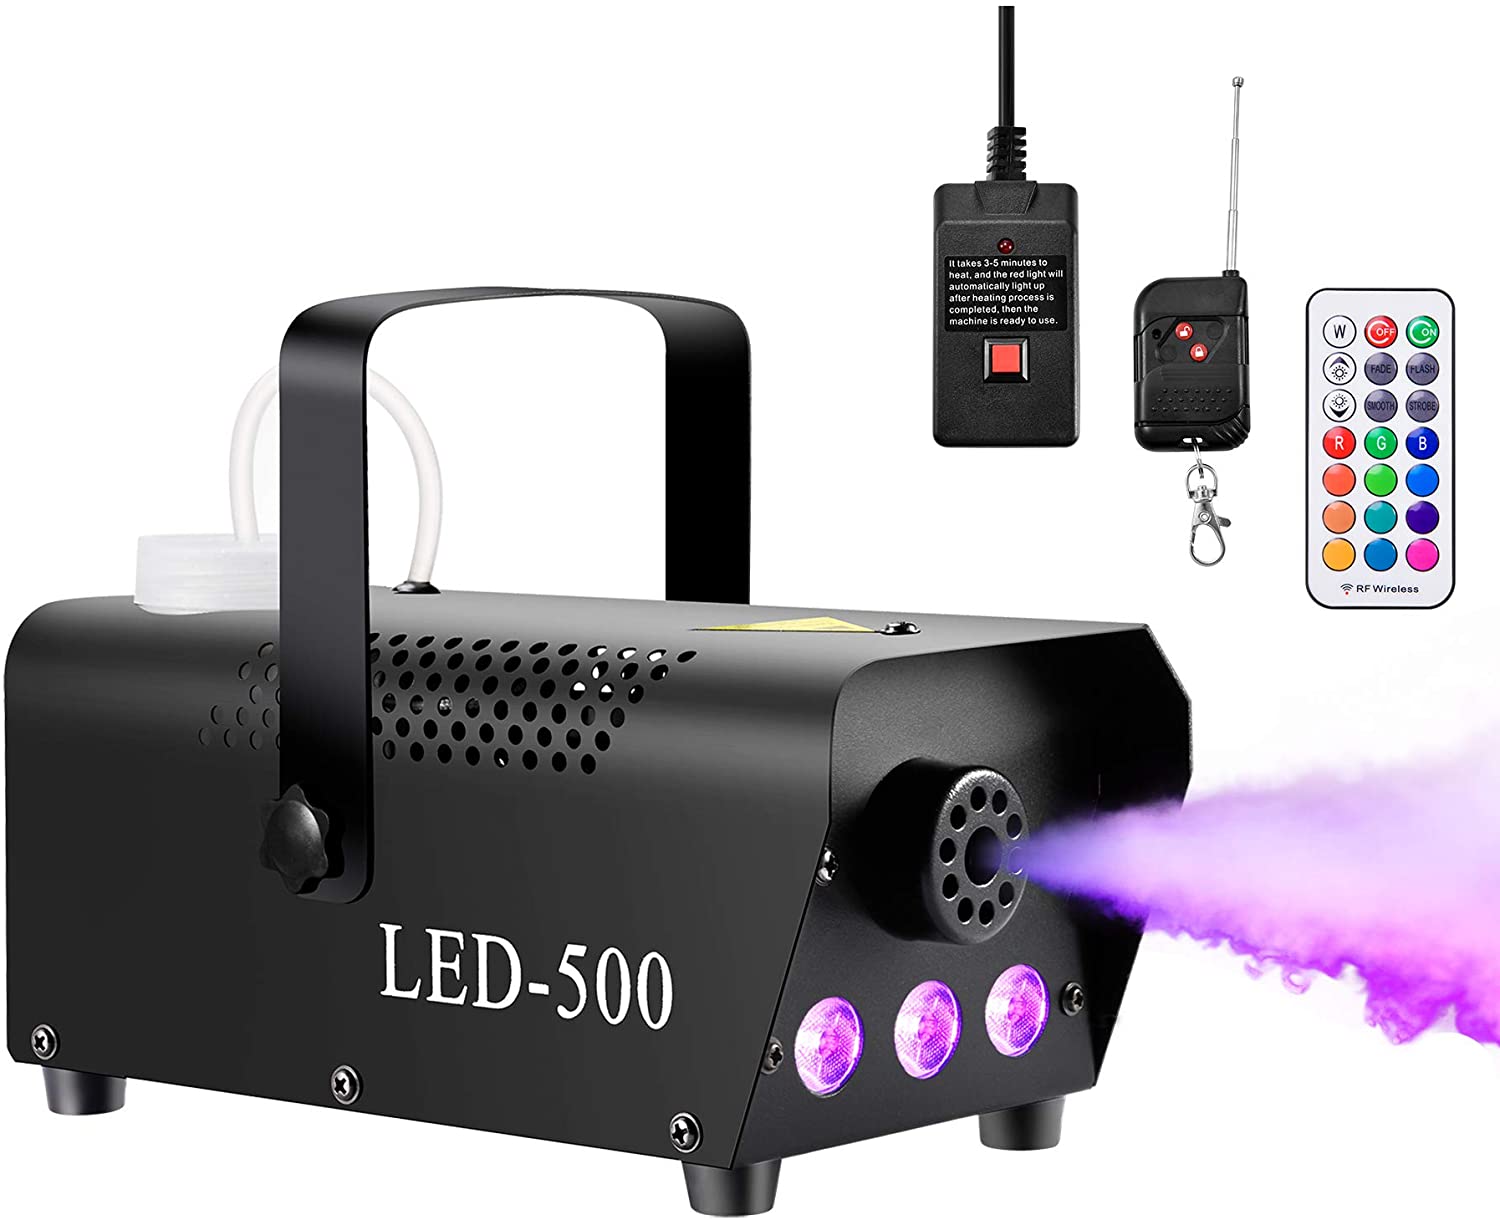 IPHUNGO Fog Machine with Controllable Lights